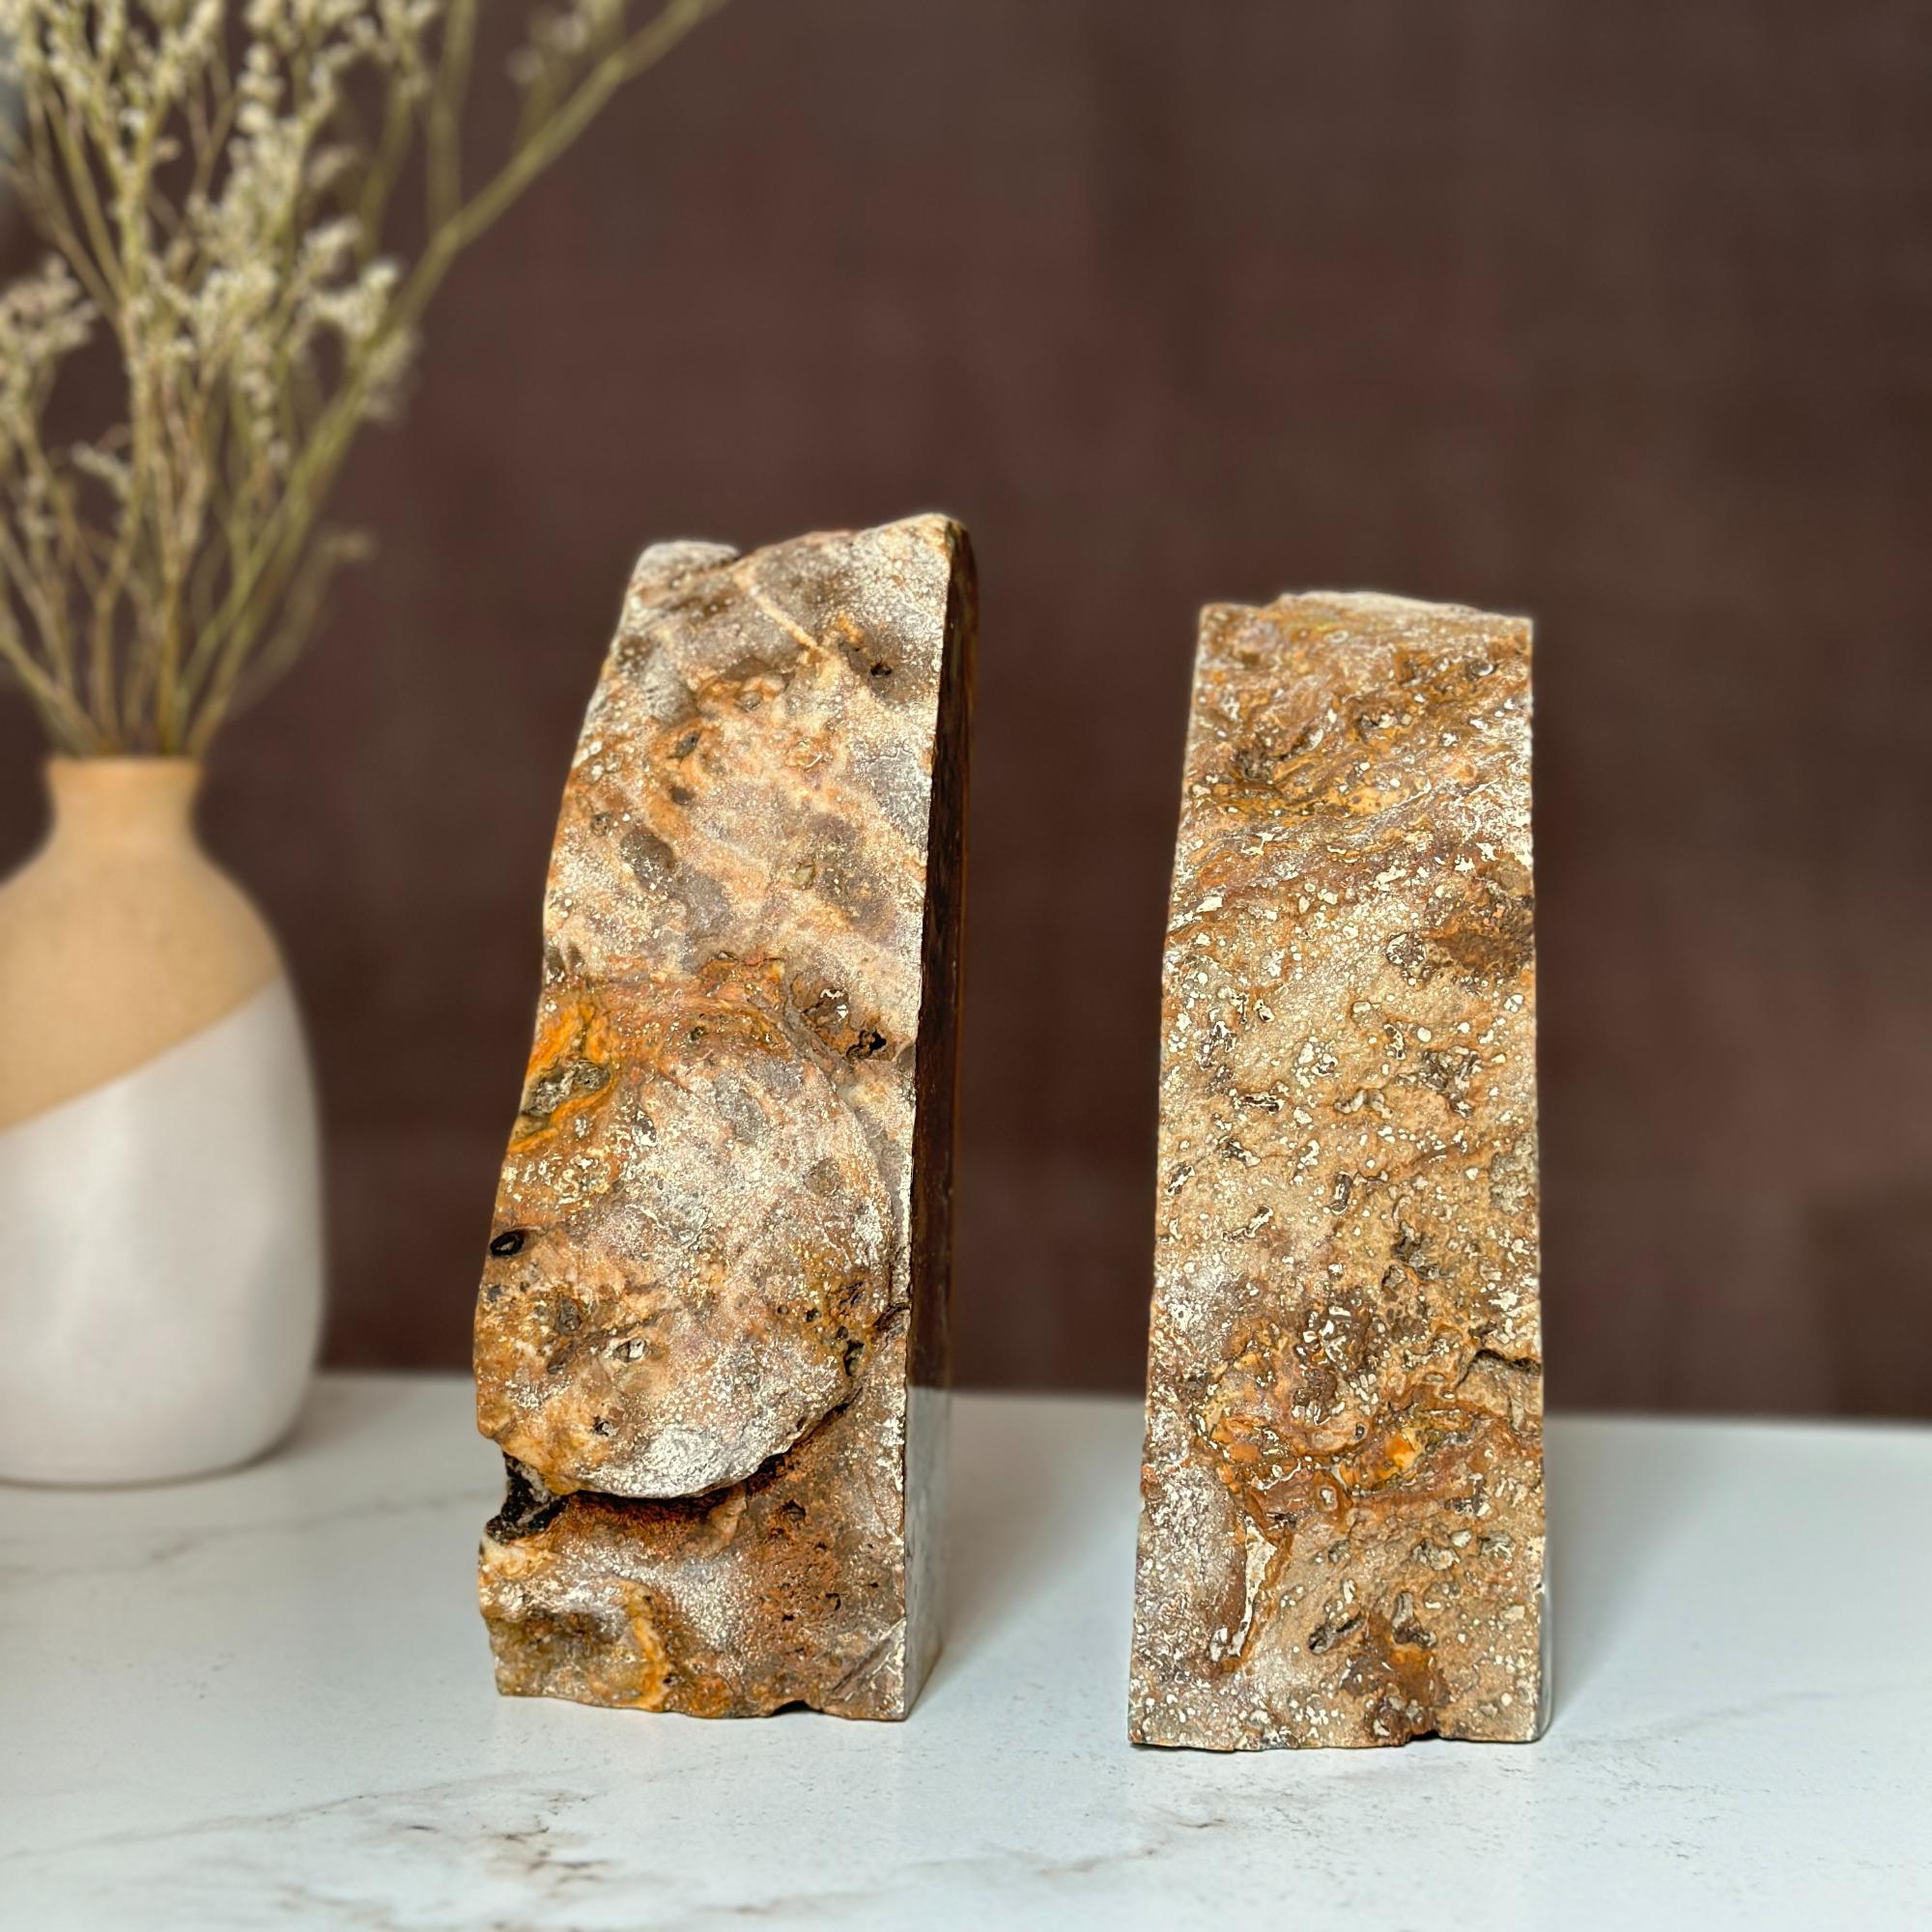 Natural Jasper and Agate Crystal Bookends, Incredible XXL Polished Stones, Premium quality crystals, extra large geode bookends for decor